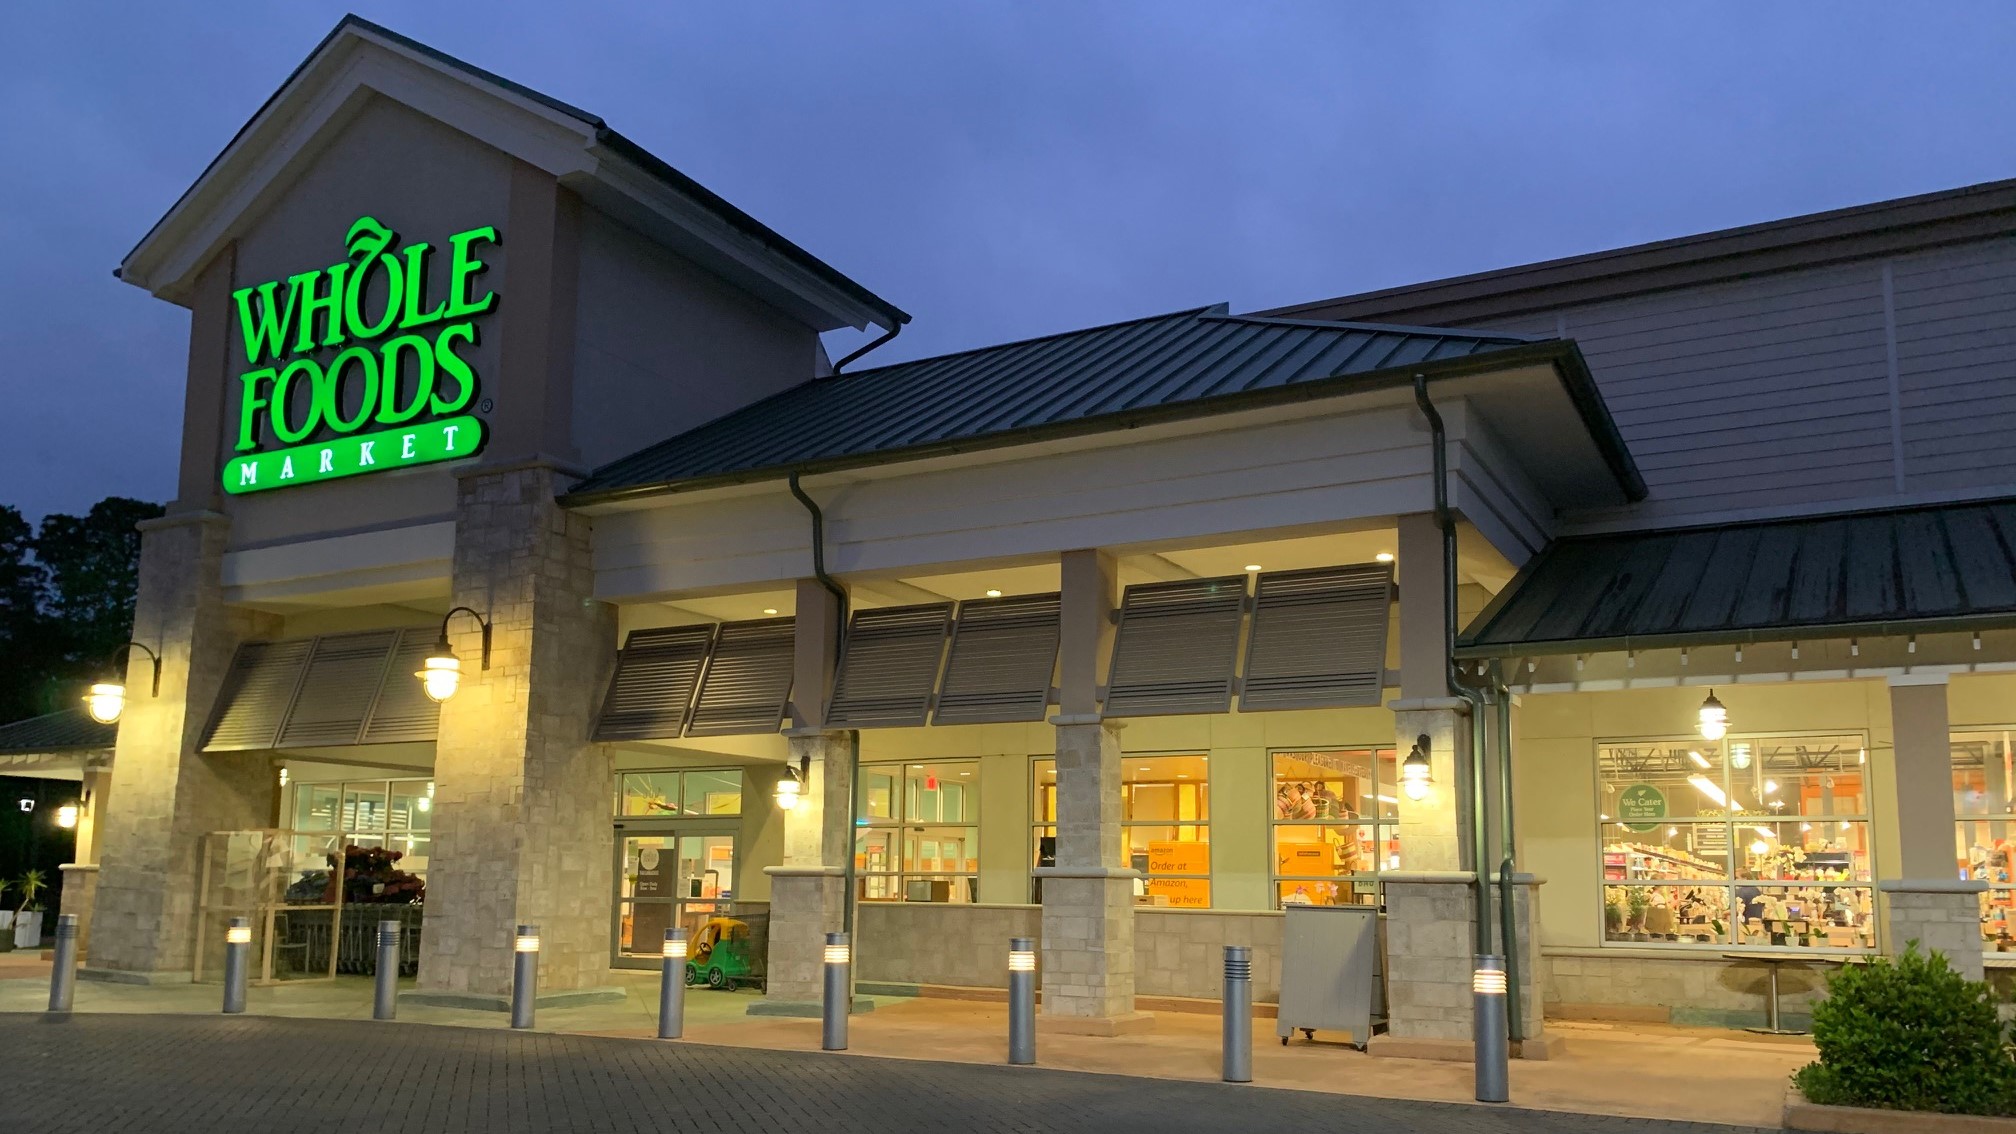 Whole Foods Employee Test Positive For COVID-19 - Framingham Source